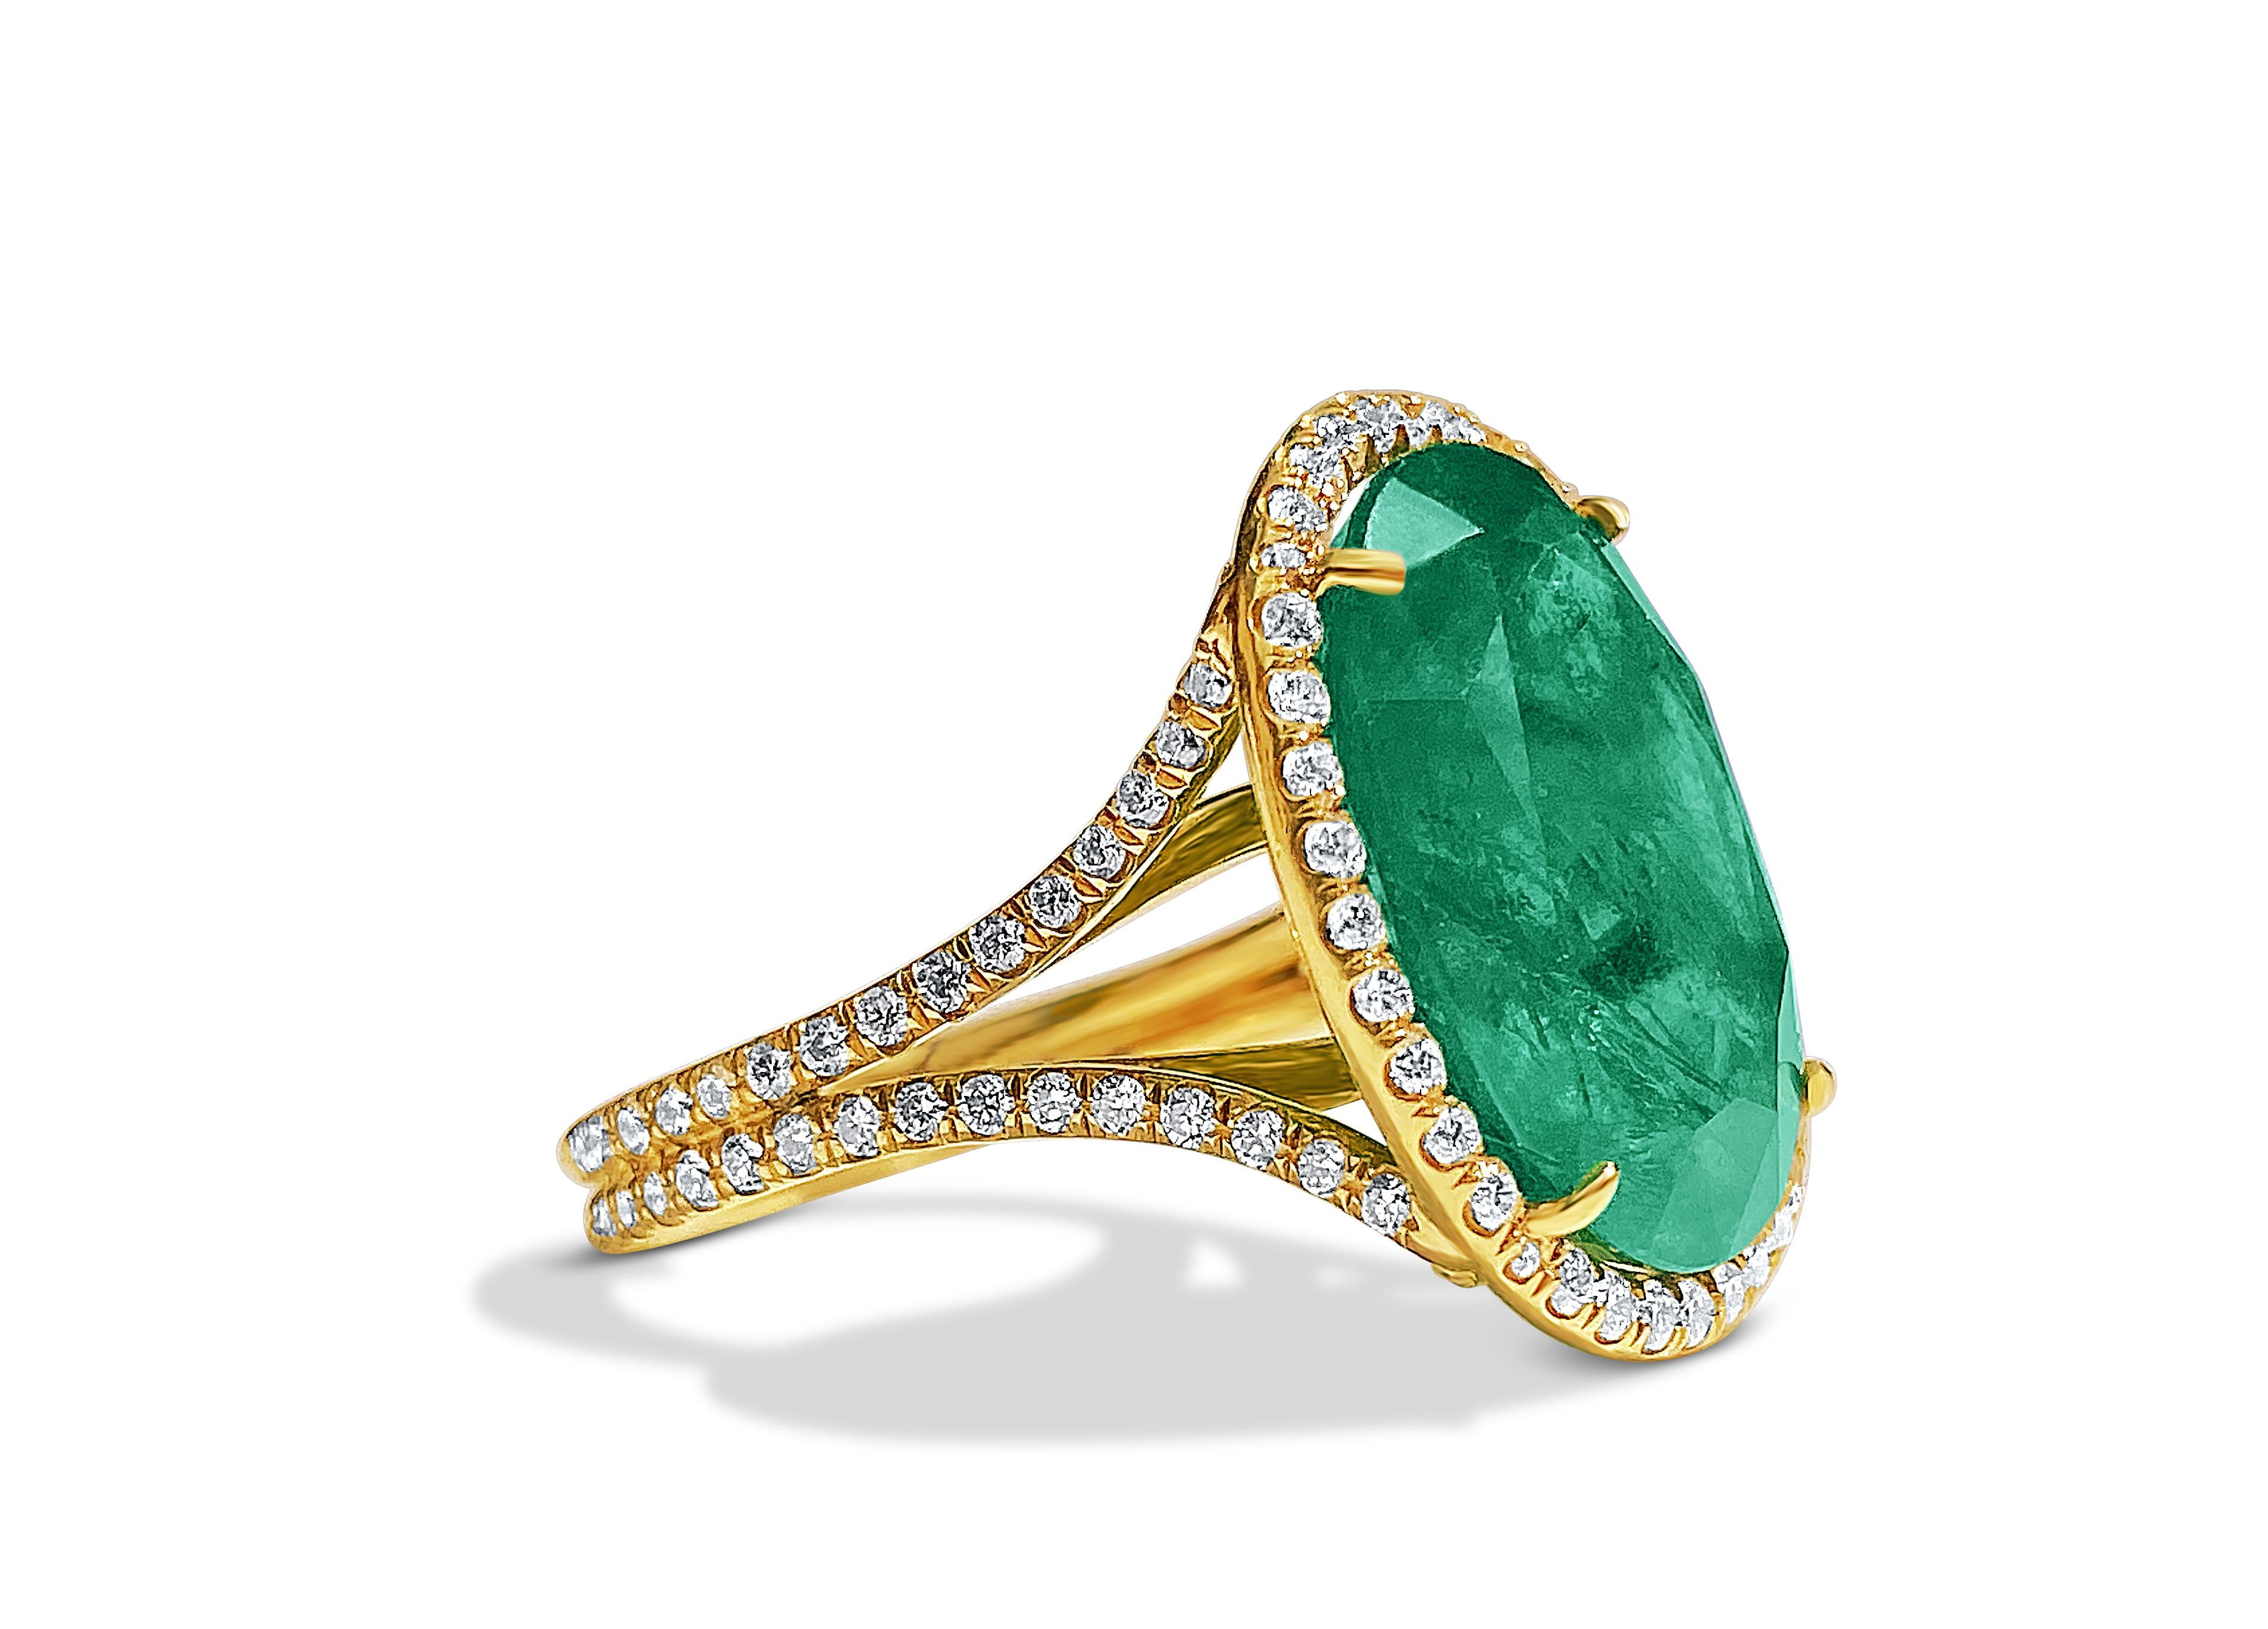 Centering a 10.80 Carat Oval-Cut Emerald, framed by an additional 1.60 carats of Round-Brilliant Cut Diamonds, and set in 18K Yellow Gold, this vintage gem 

Ring setting is brilliantly handmade with two elevated ball points in the rings interior,